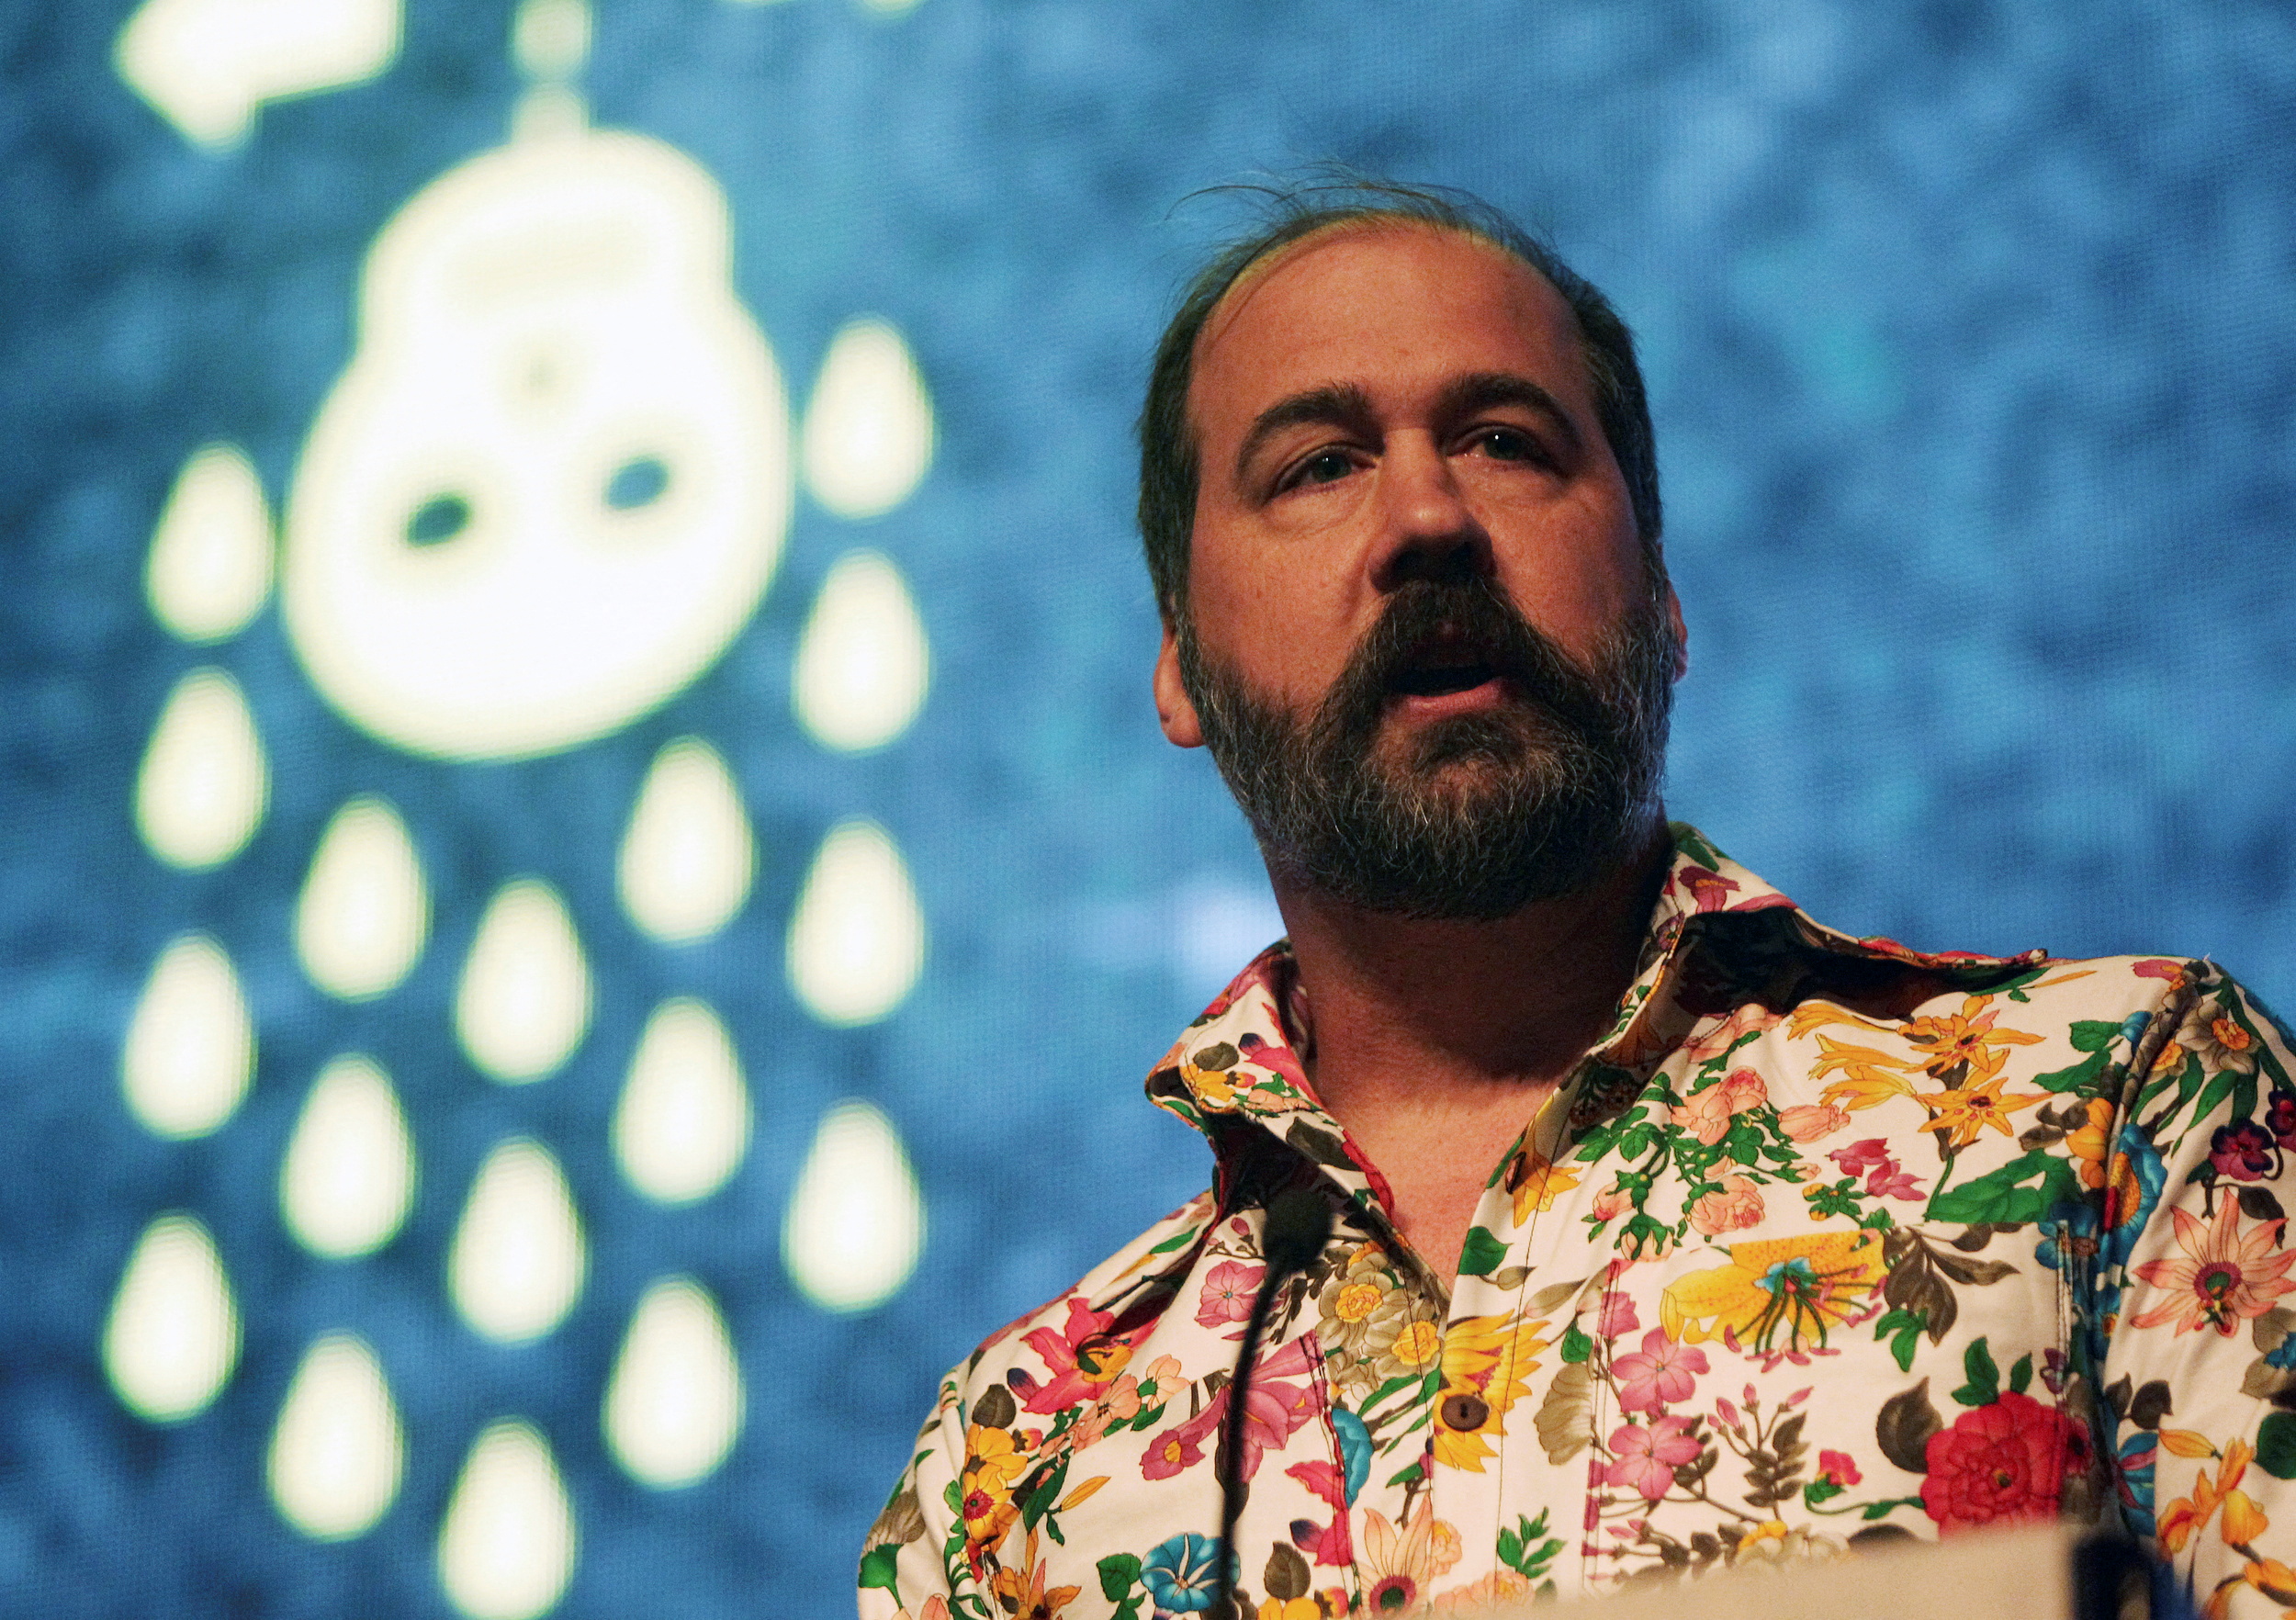 Former Nirvana bassist Krist Novoselic speaks to guests at the premiere of the 